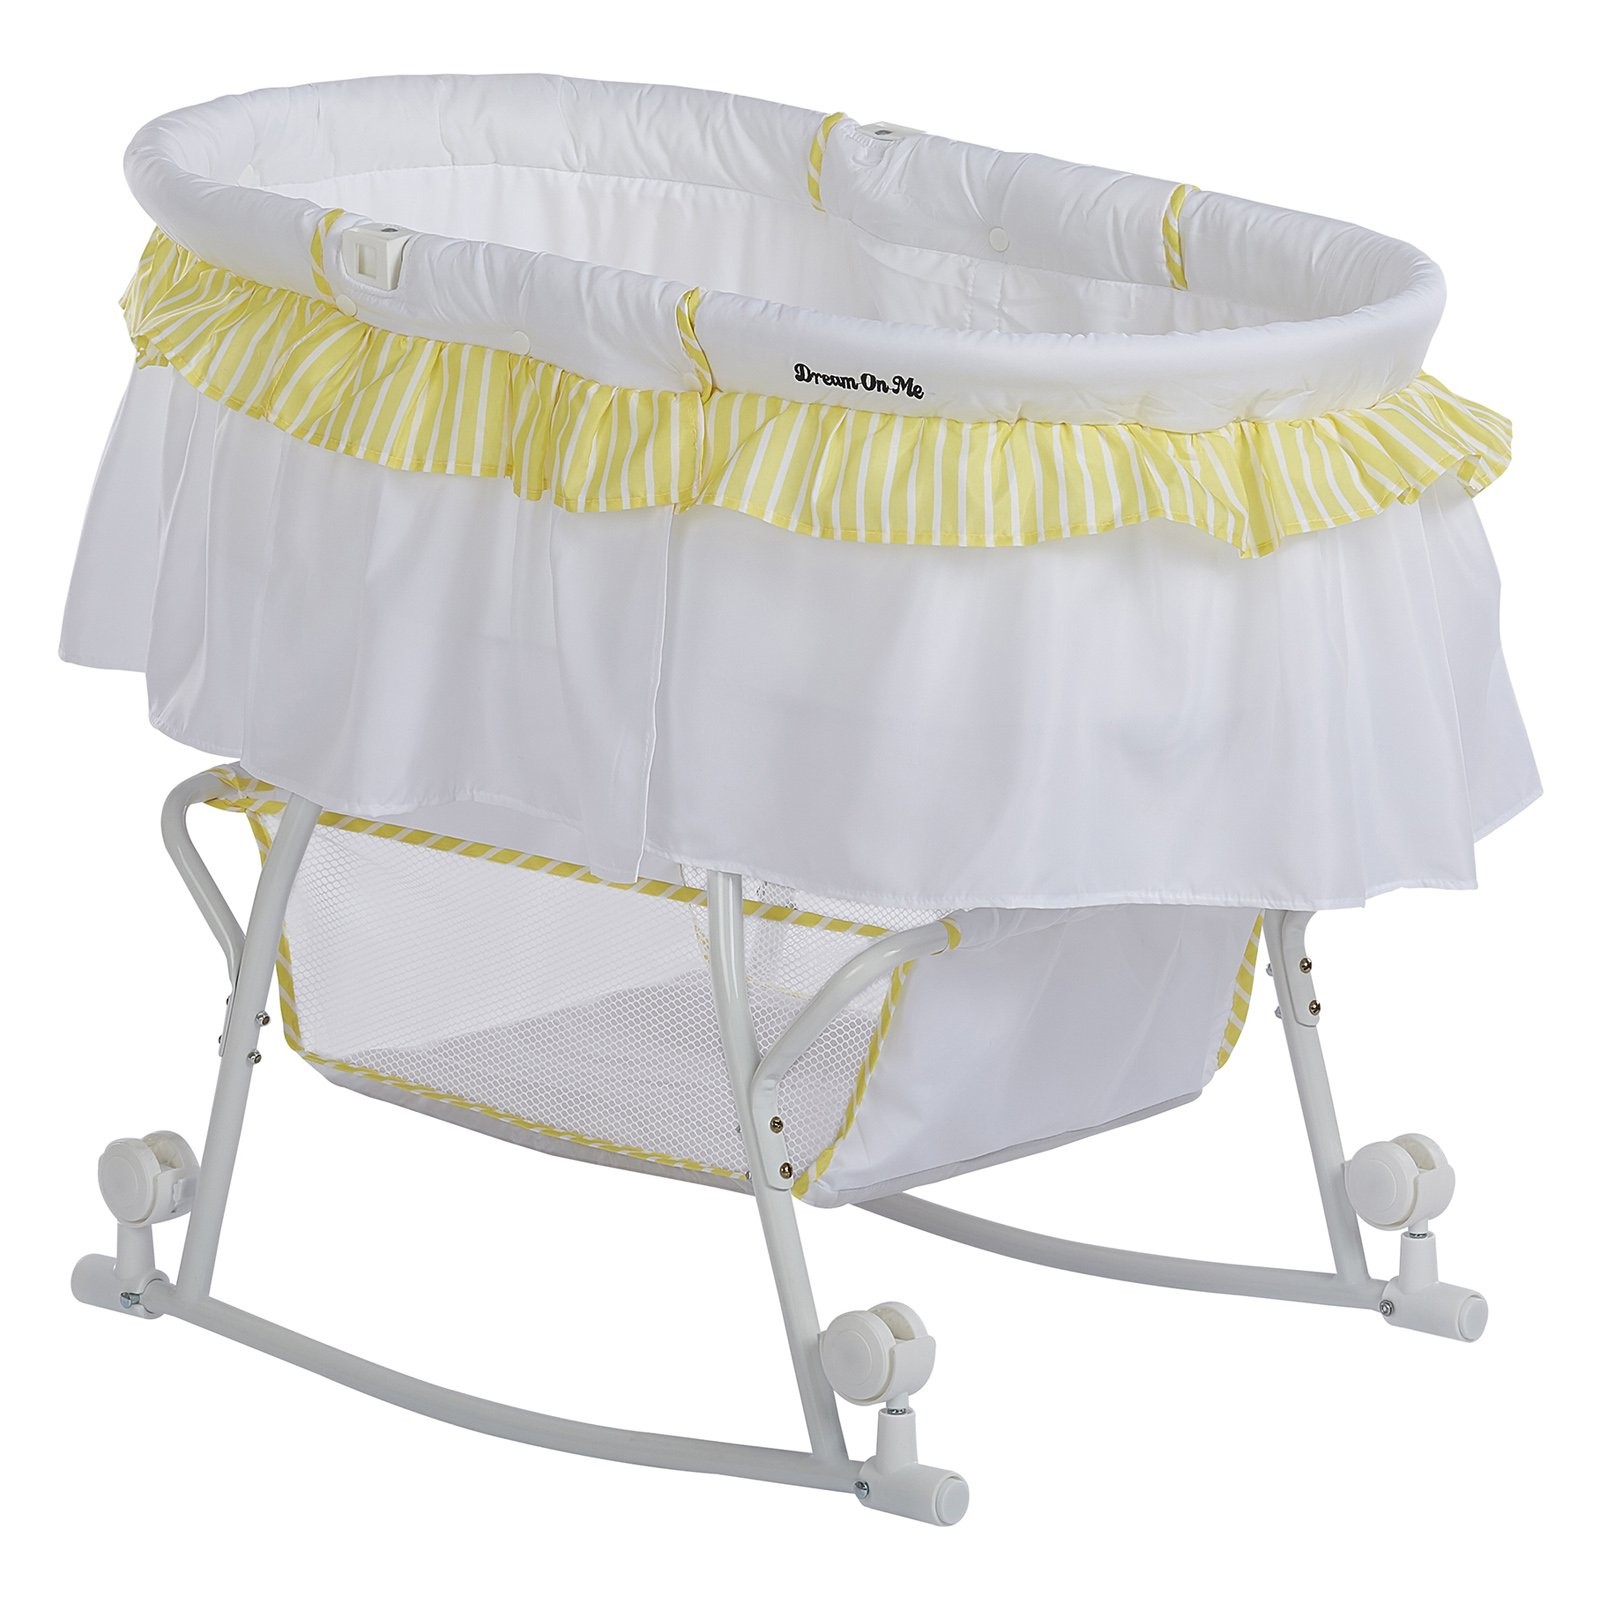 Dream On Me Lacy Portable 2-in-1 Bassinet & Cradle in Pink and White, Lightweight Baby Bassinet - image 4 of 7